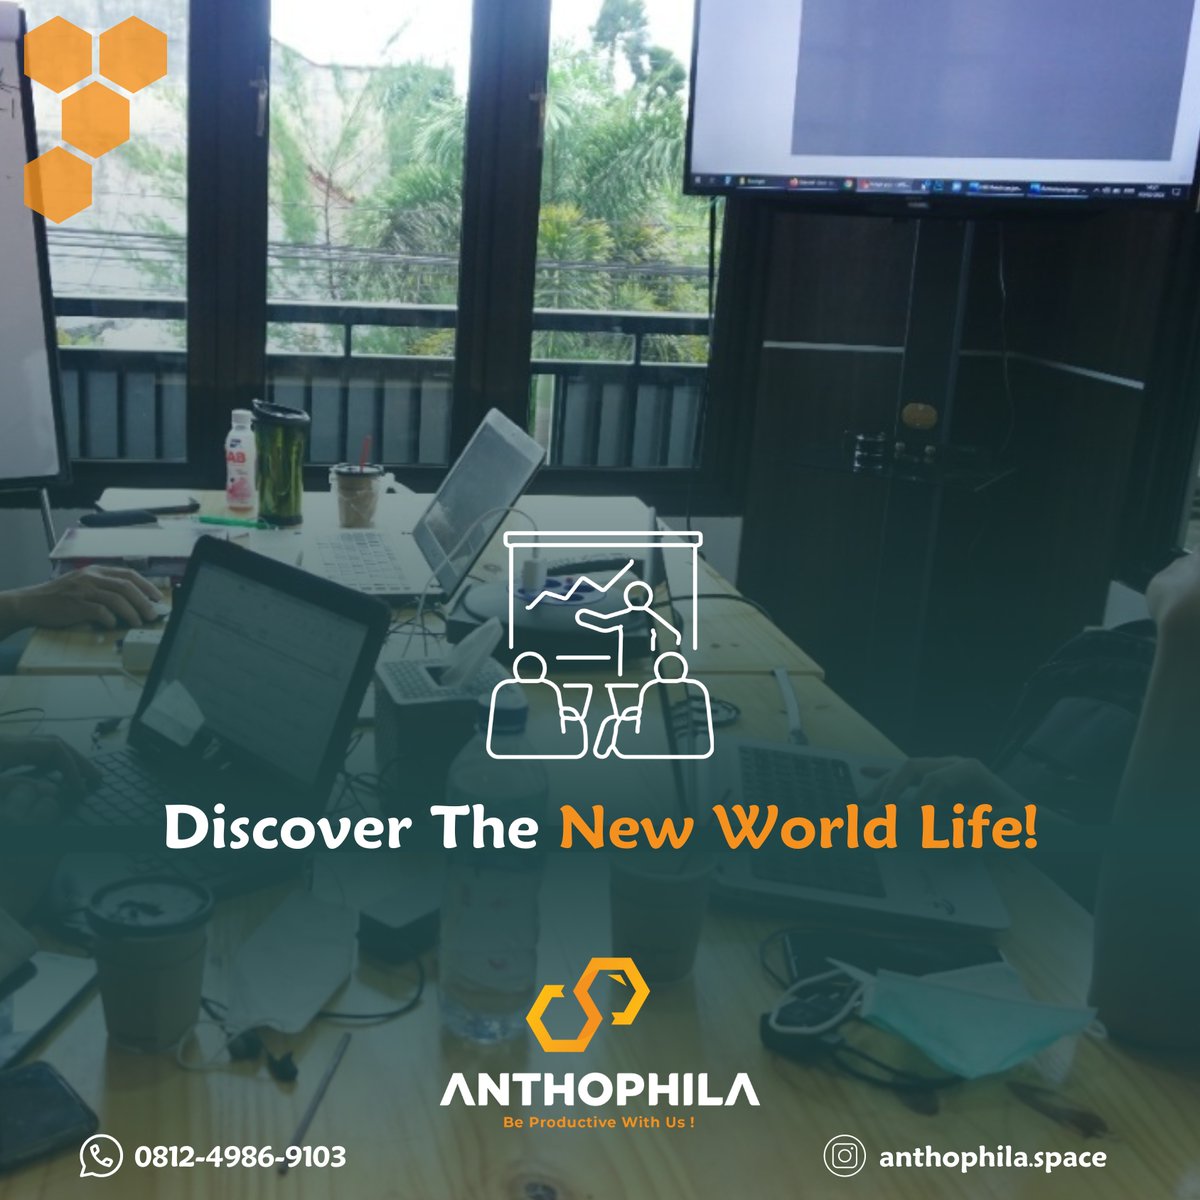 Discover the new world life!
For your productivity!

#AnthophilaCoworkingSpace,
#BeProductiveWithUs,
#coworkingspacemalang,
#startupindonesia,
#freelancerindonesia,
#pengusaha,
#pengusahamuslim,
#pengusahamuda,
#pengusahadigital,
#bisnismuslim,
#bisnis,

Sarapan Gaji 10 milyar